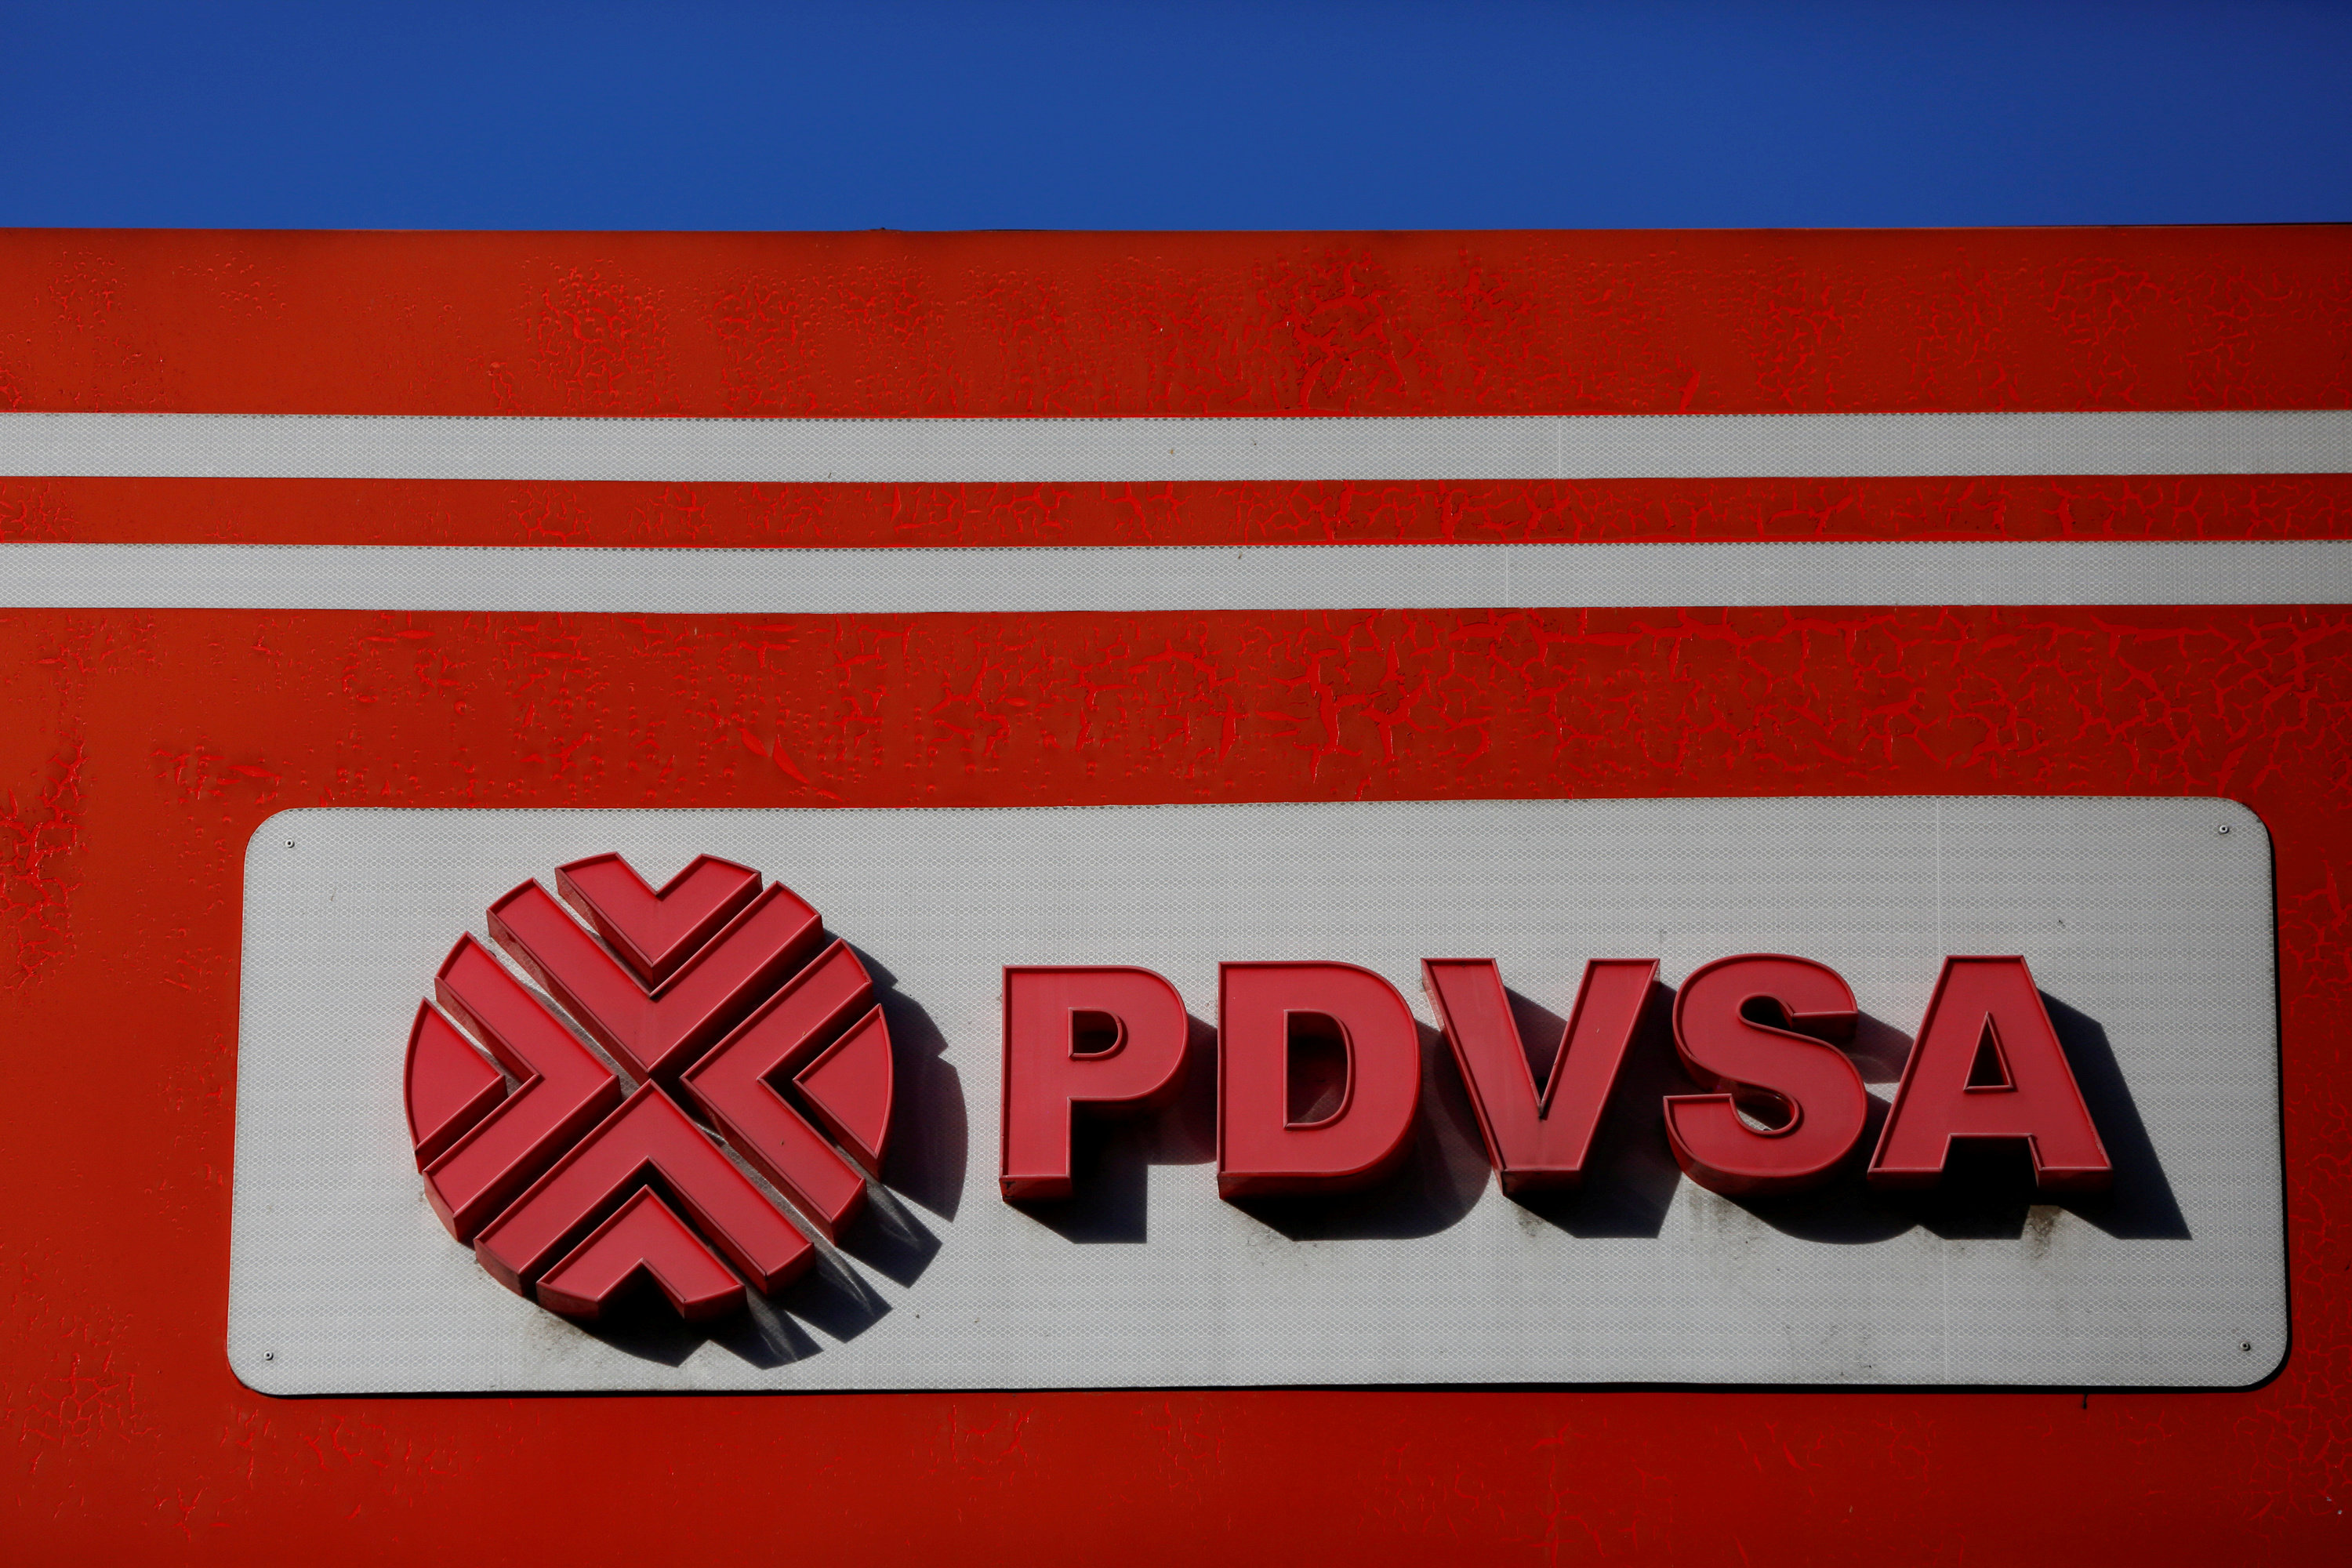 New Venezuela oil boss to give military more posts at state oil company PDVSA